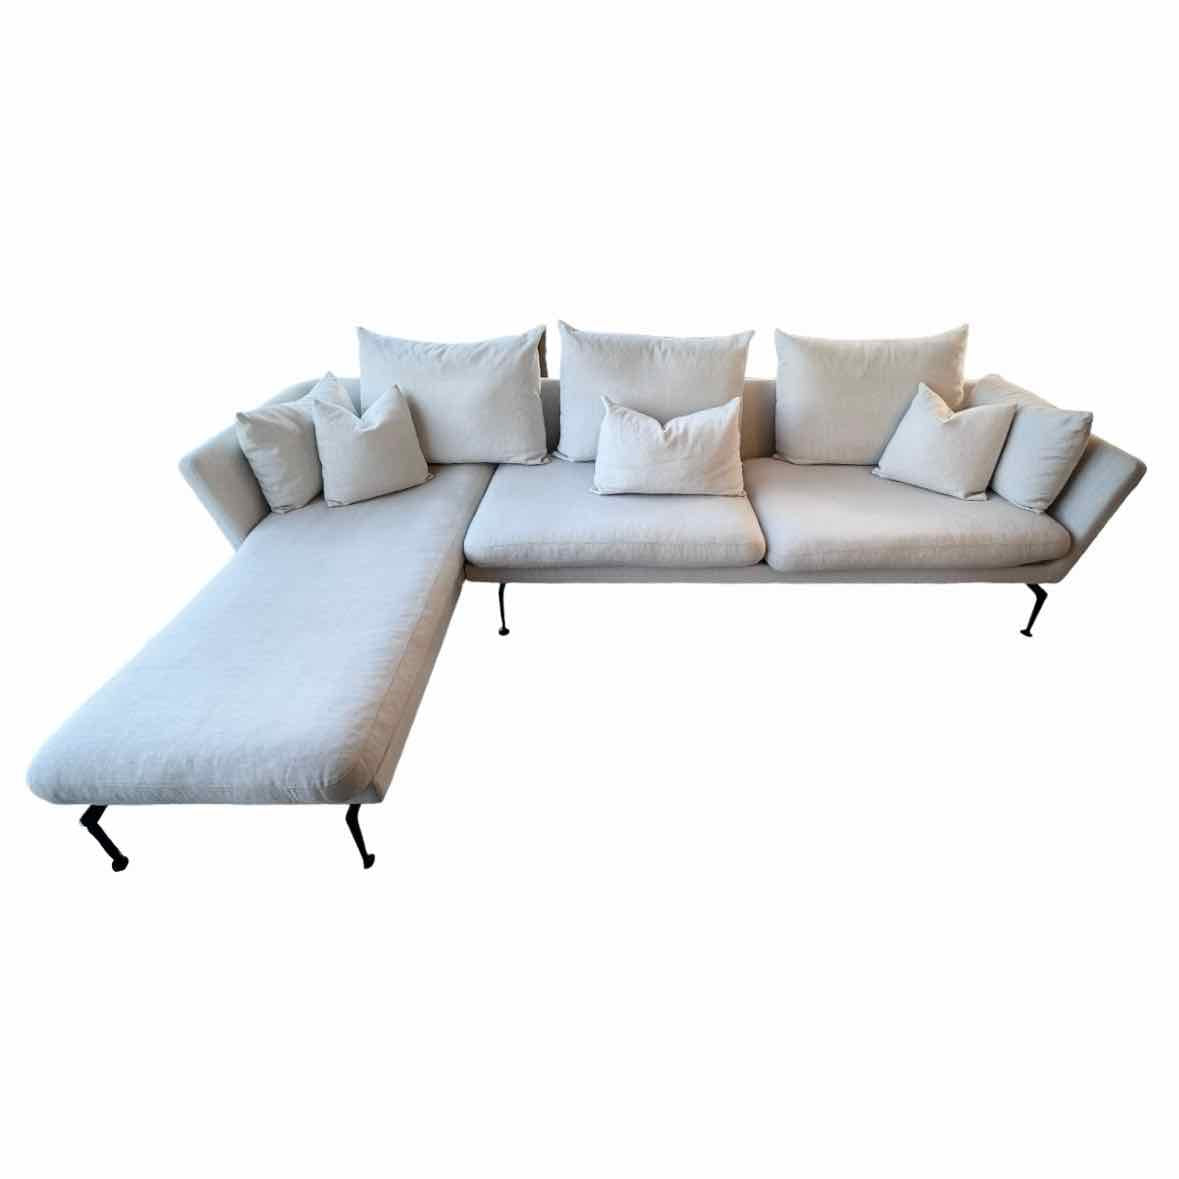 Vitra 2 Seater & Chaise Lounge Right Arm AS IS 119"Lx67"Dx26.5"H